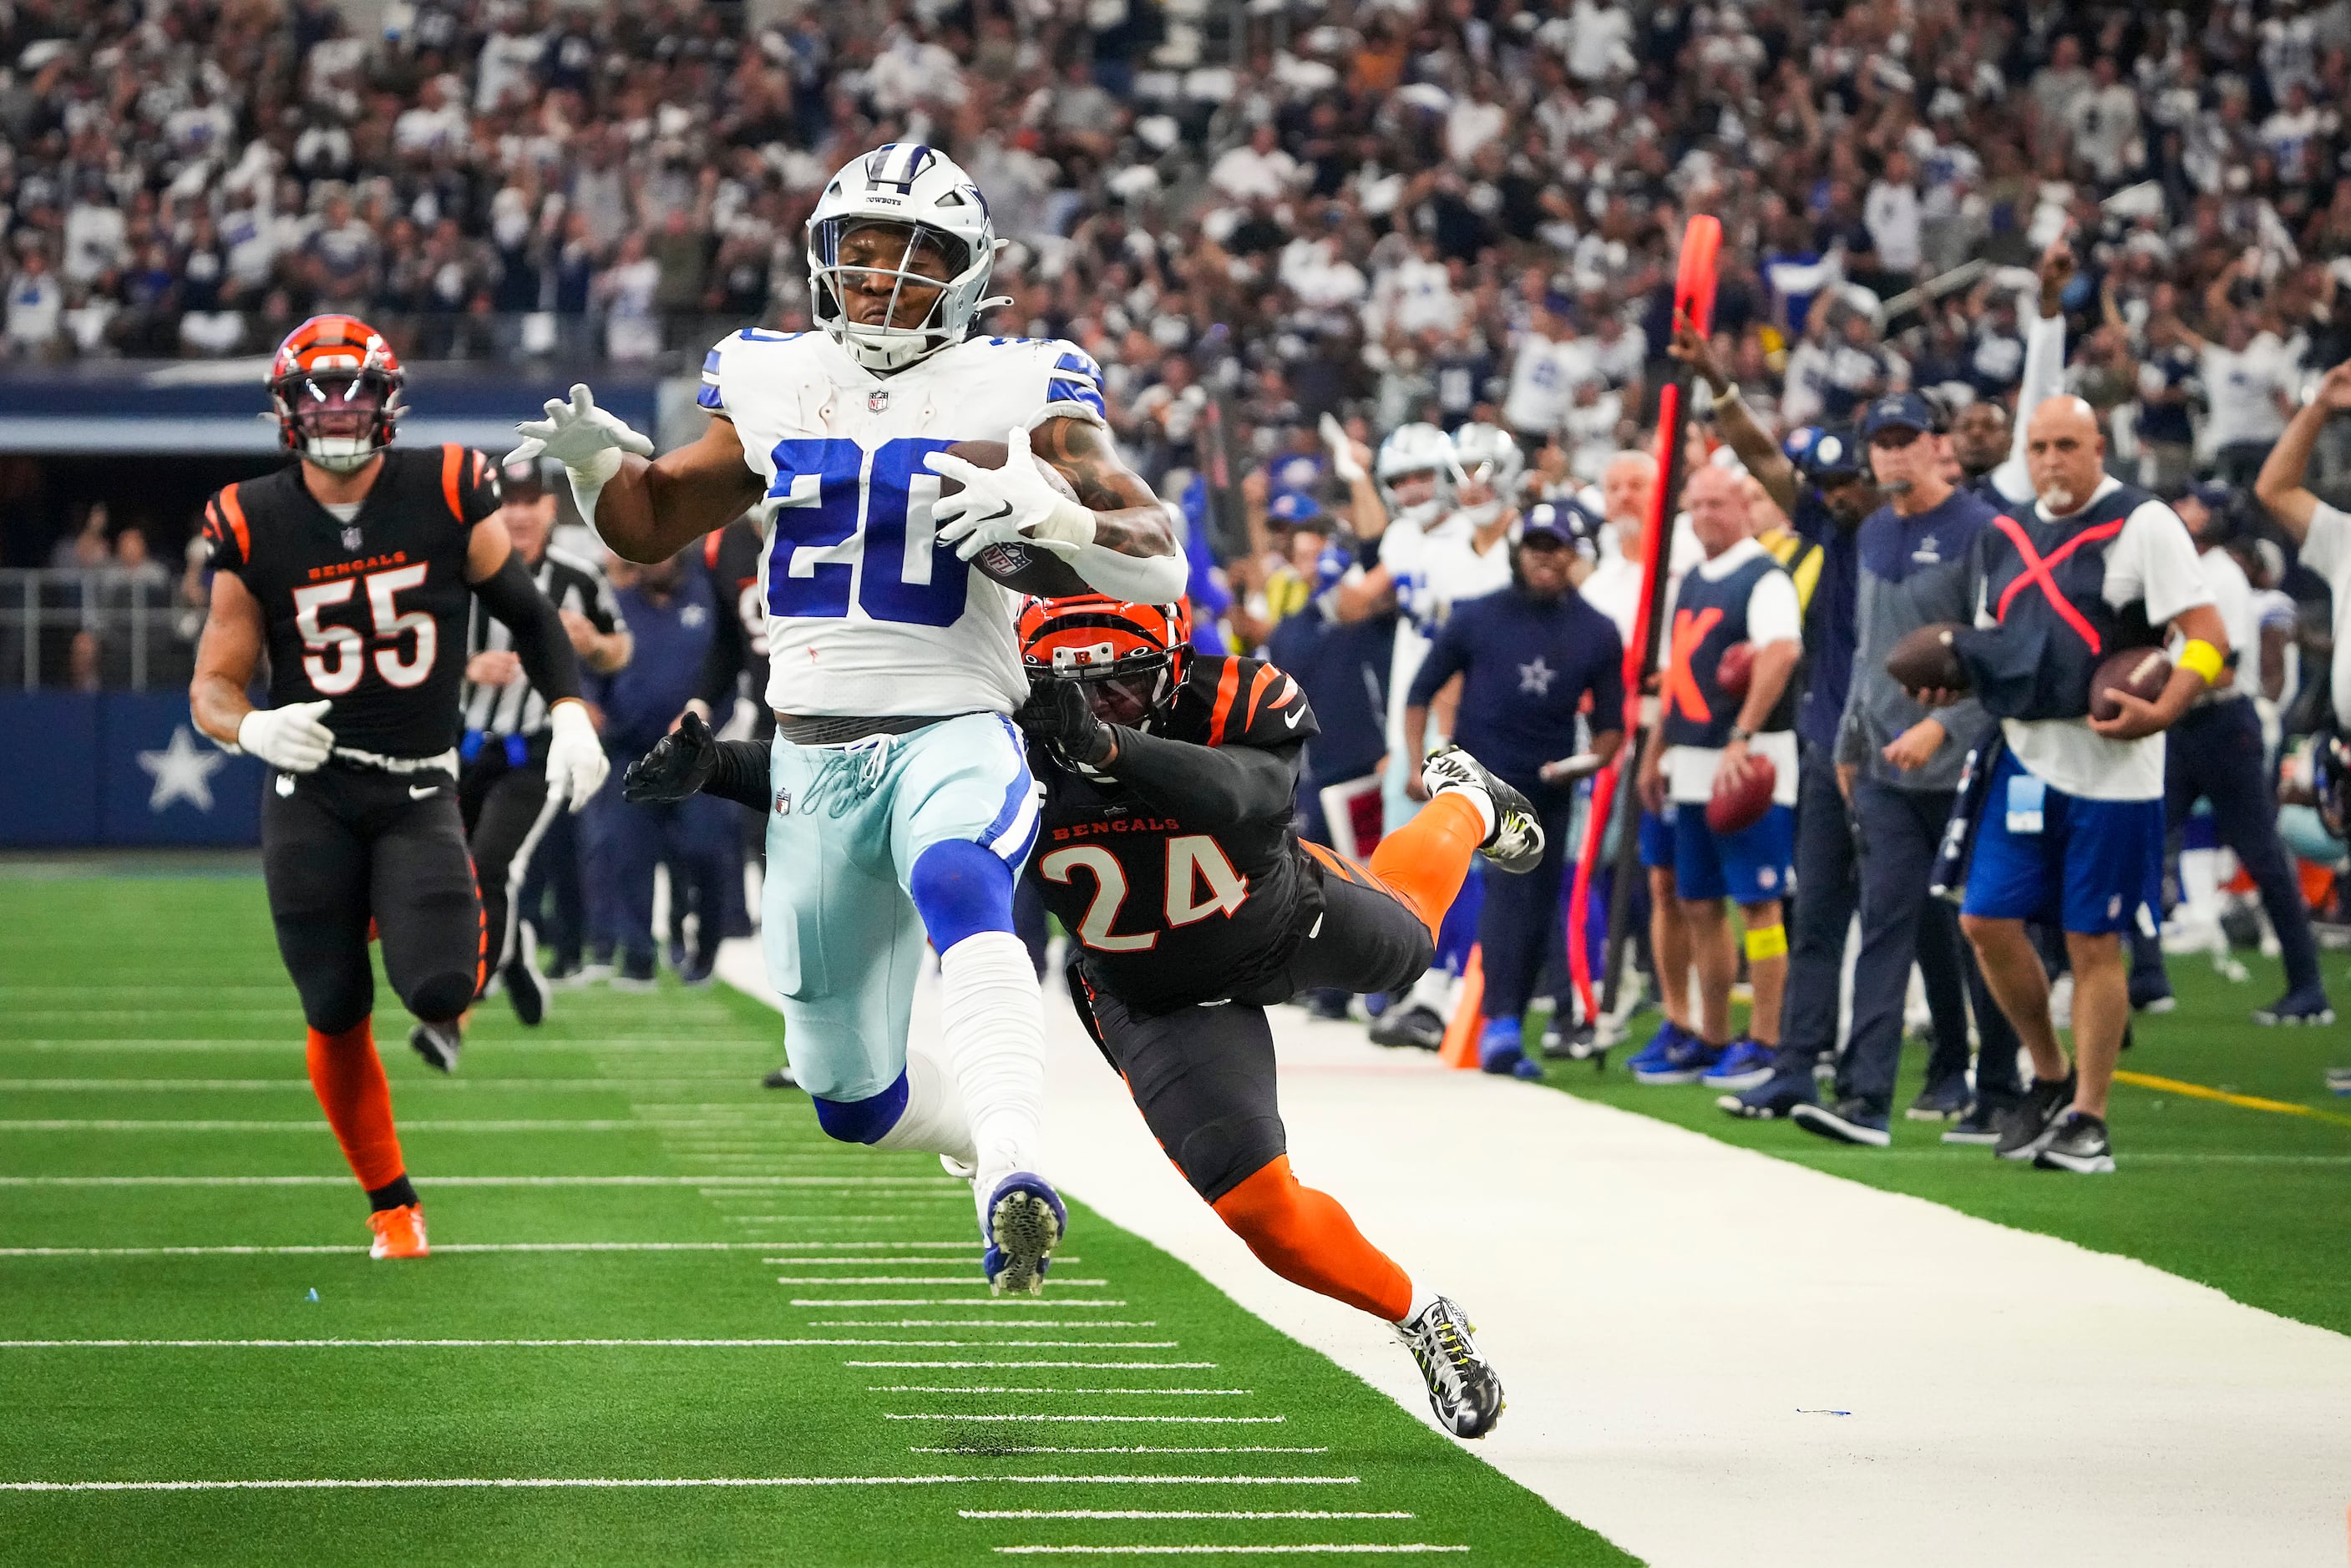 What a Rush: See photos from the Cowboys' 20-17 win over Cincinnati